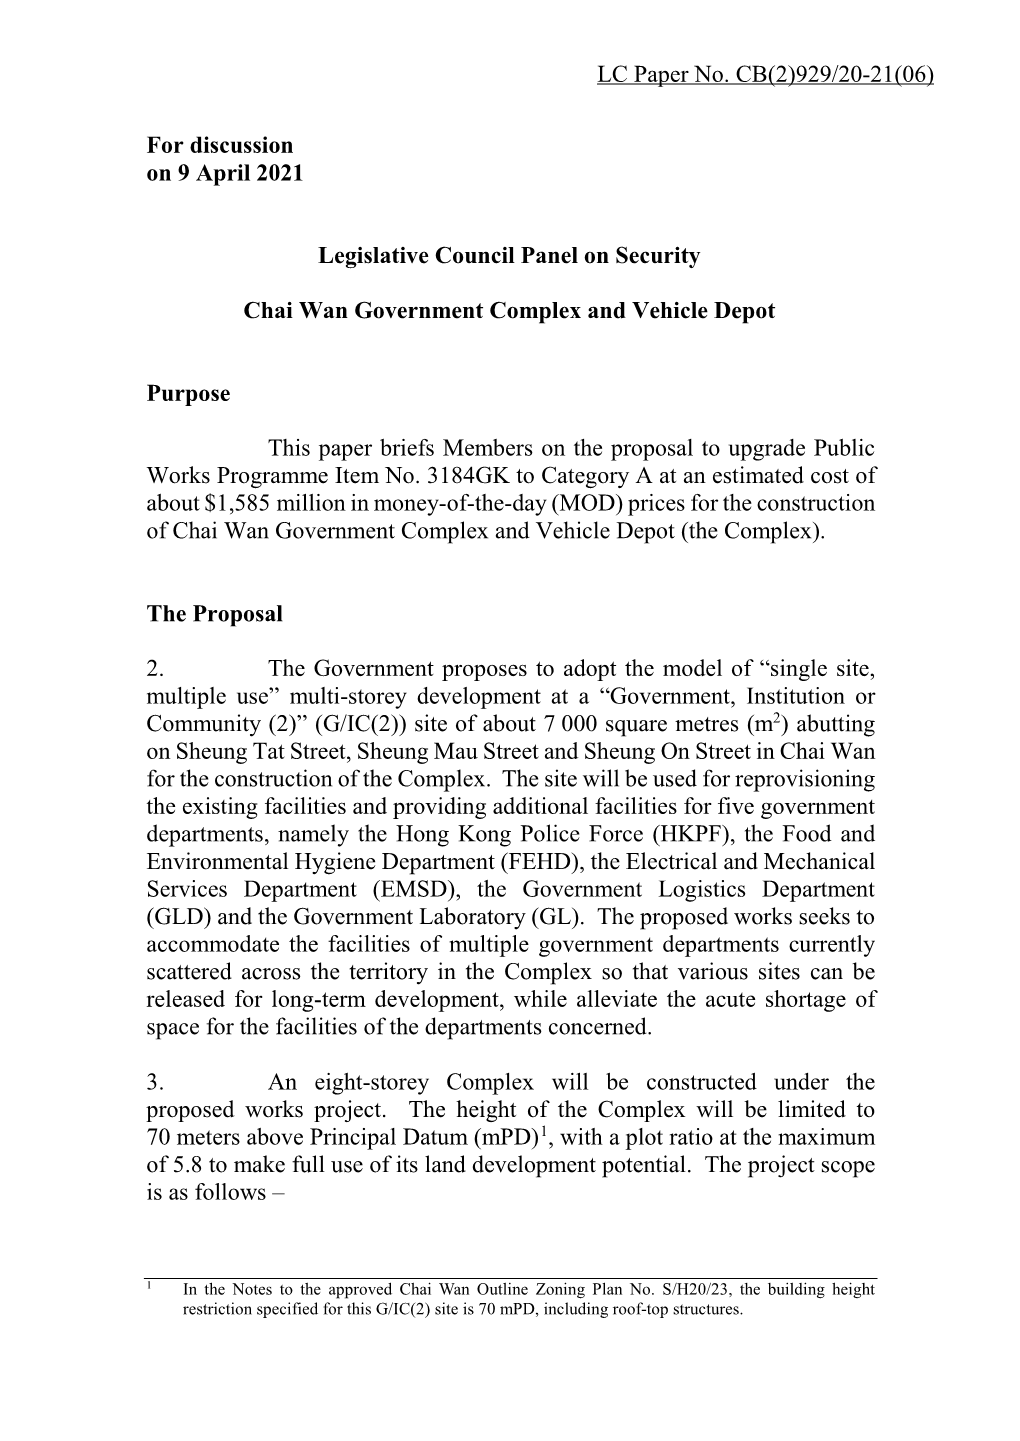 Administration's Paper on the Chai Wan Government Complex And